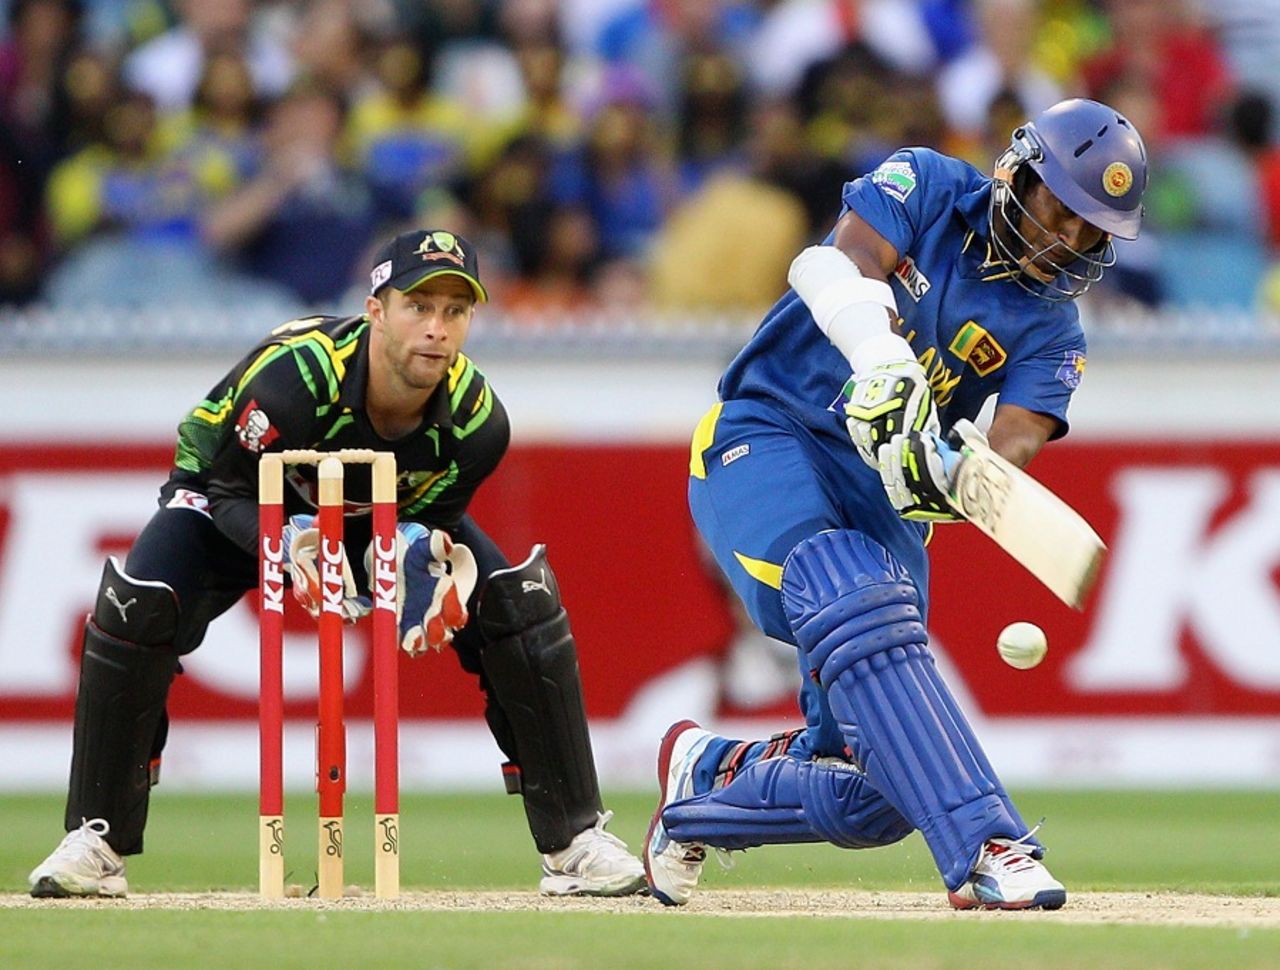 Jeevan Mendis was involved in a 63-run stand with Mahela Jayawardene for the fourth wicket, Australia v Sri Lanka, 2nd T20, Melbourne, January 28, 2013